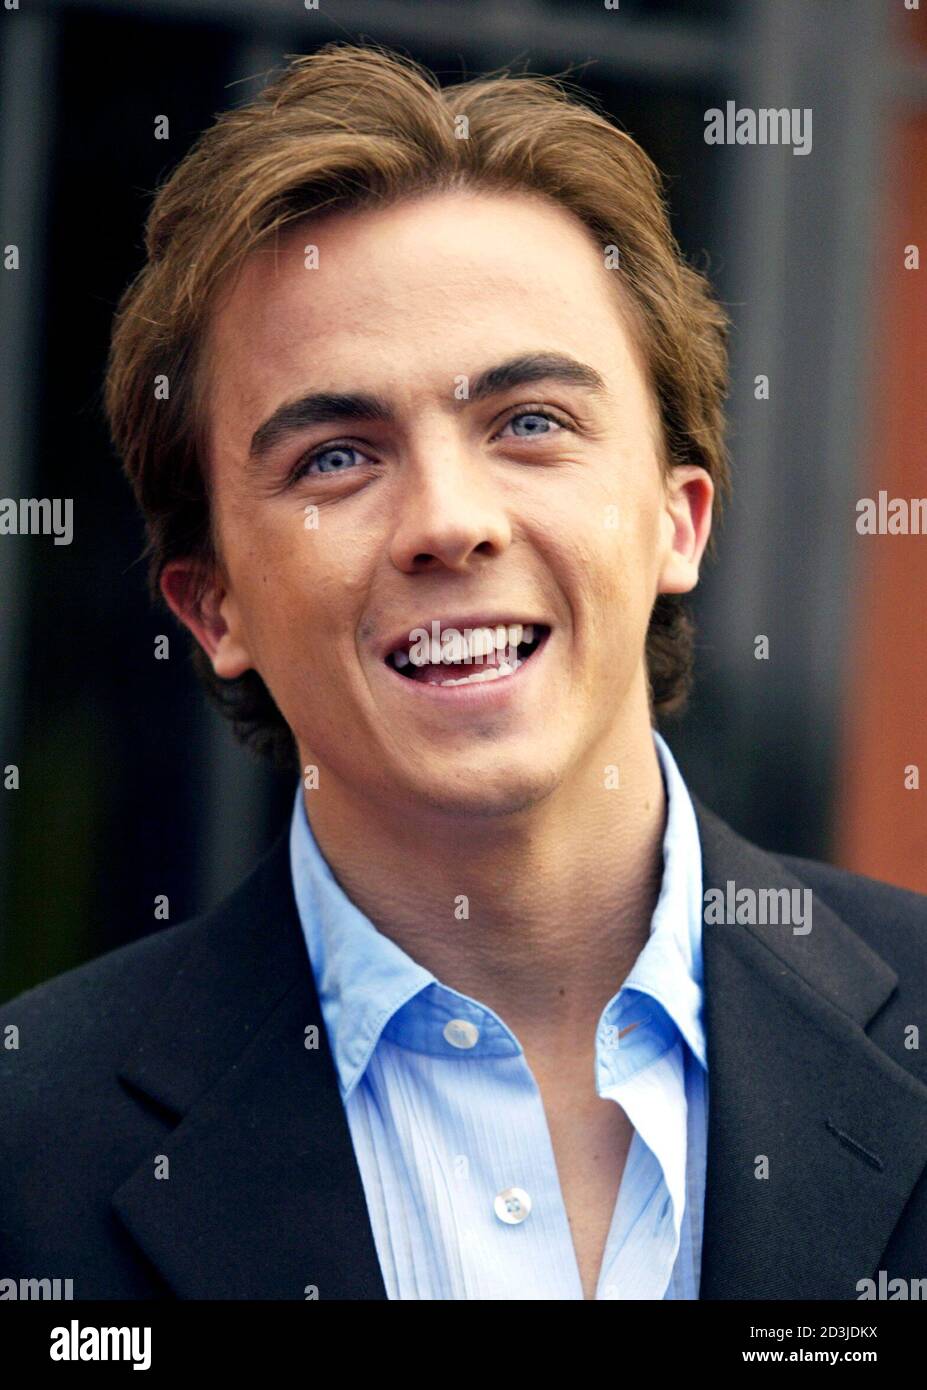 U.S. actor Frankie Muniz arrives for the seventh annual Young Hollywood Awards in Hollywood May 1, 2005. The event, sponsored by 'Movieline's Hollywood Life' magazine, recognizes the performances of Hollywood's younger generation. Stock Photo